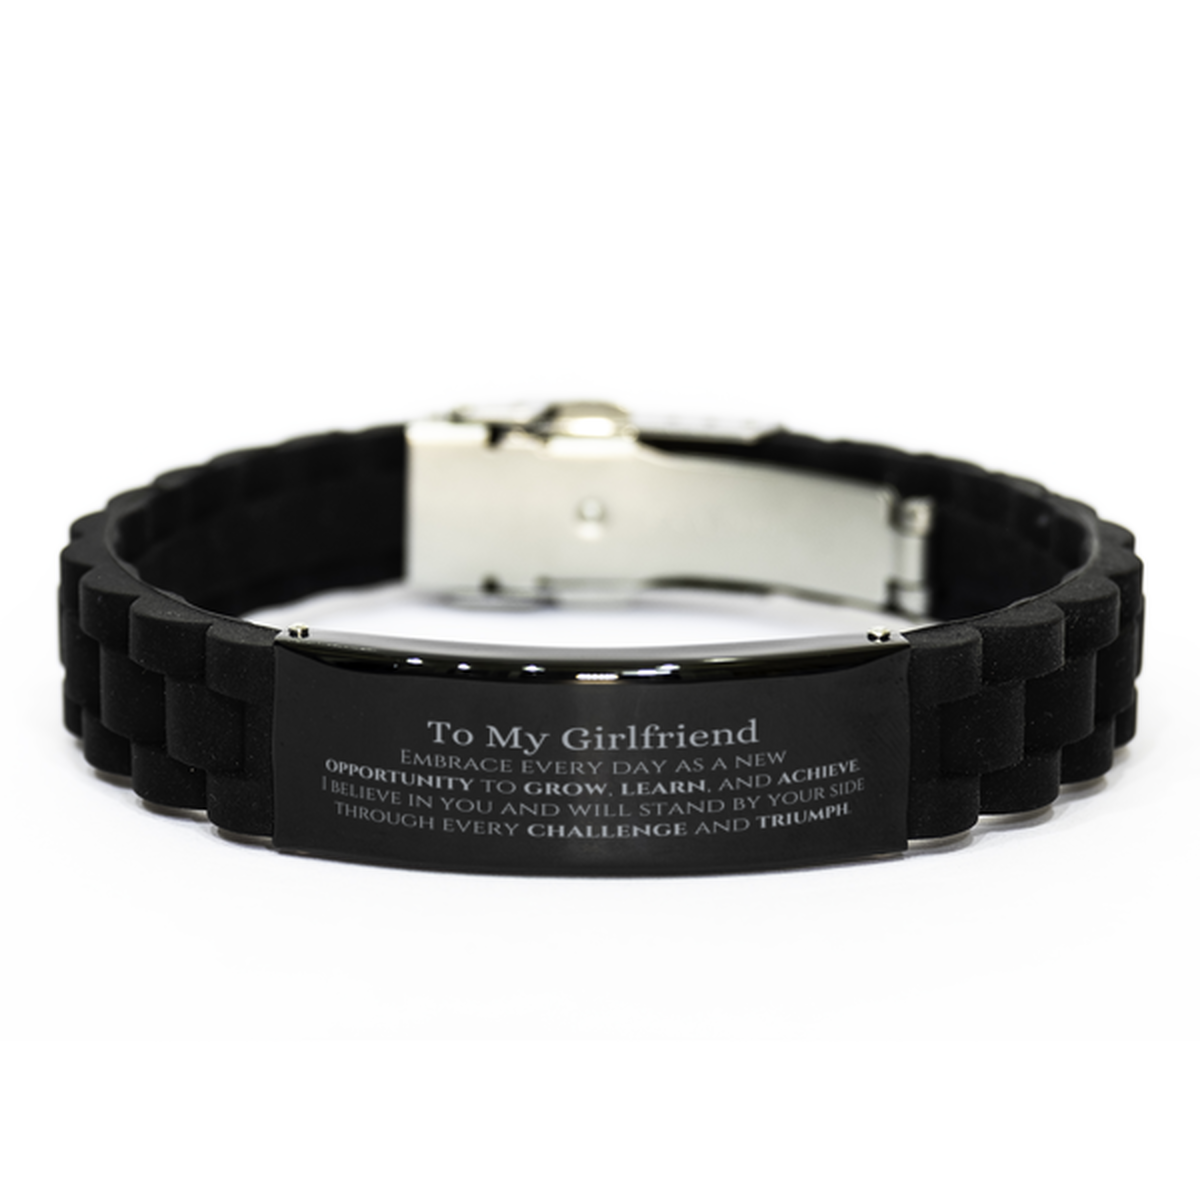 To My Girlfriend Gifts, I believe in you and will stand by your side, Inspirational Black Glidelock Clasp Bracelet For Girlfriend, Birthday Christmas Motivational Girlfriend Gifts